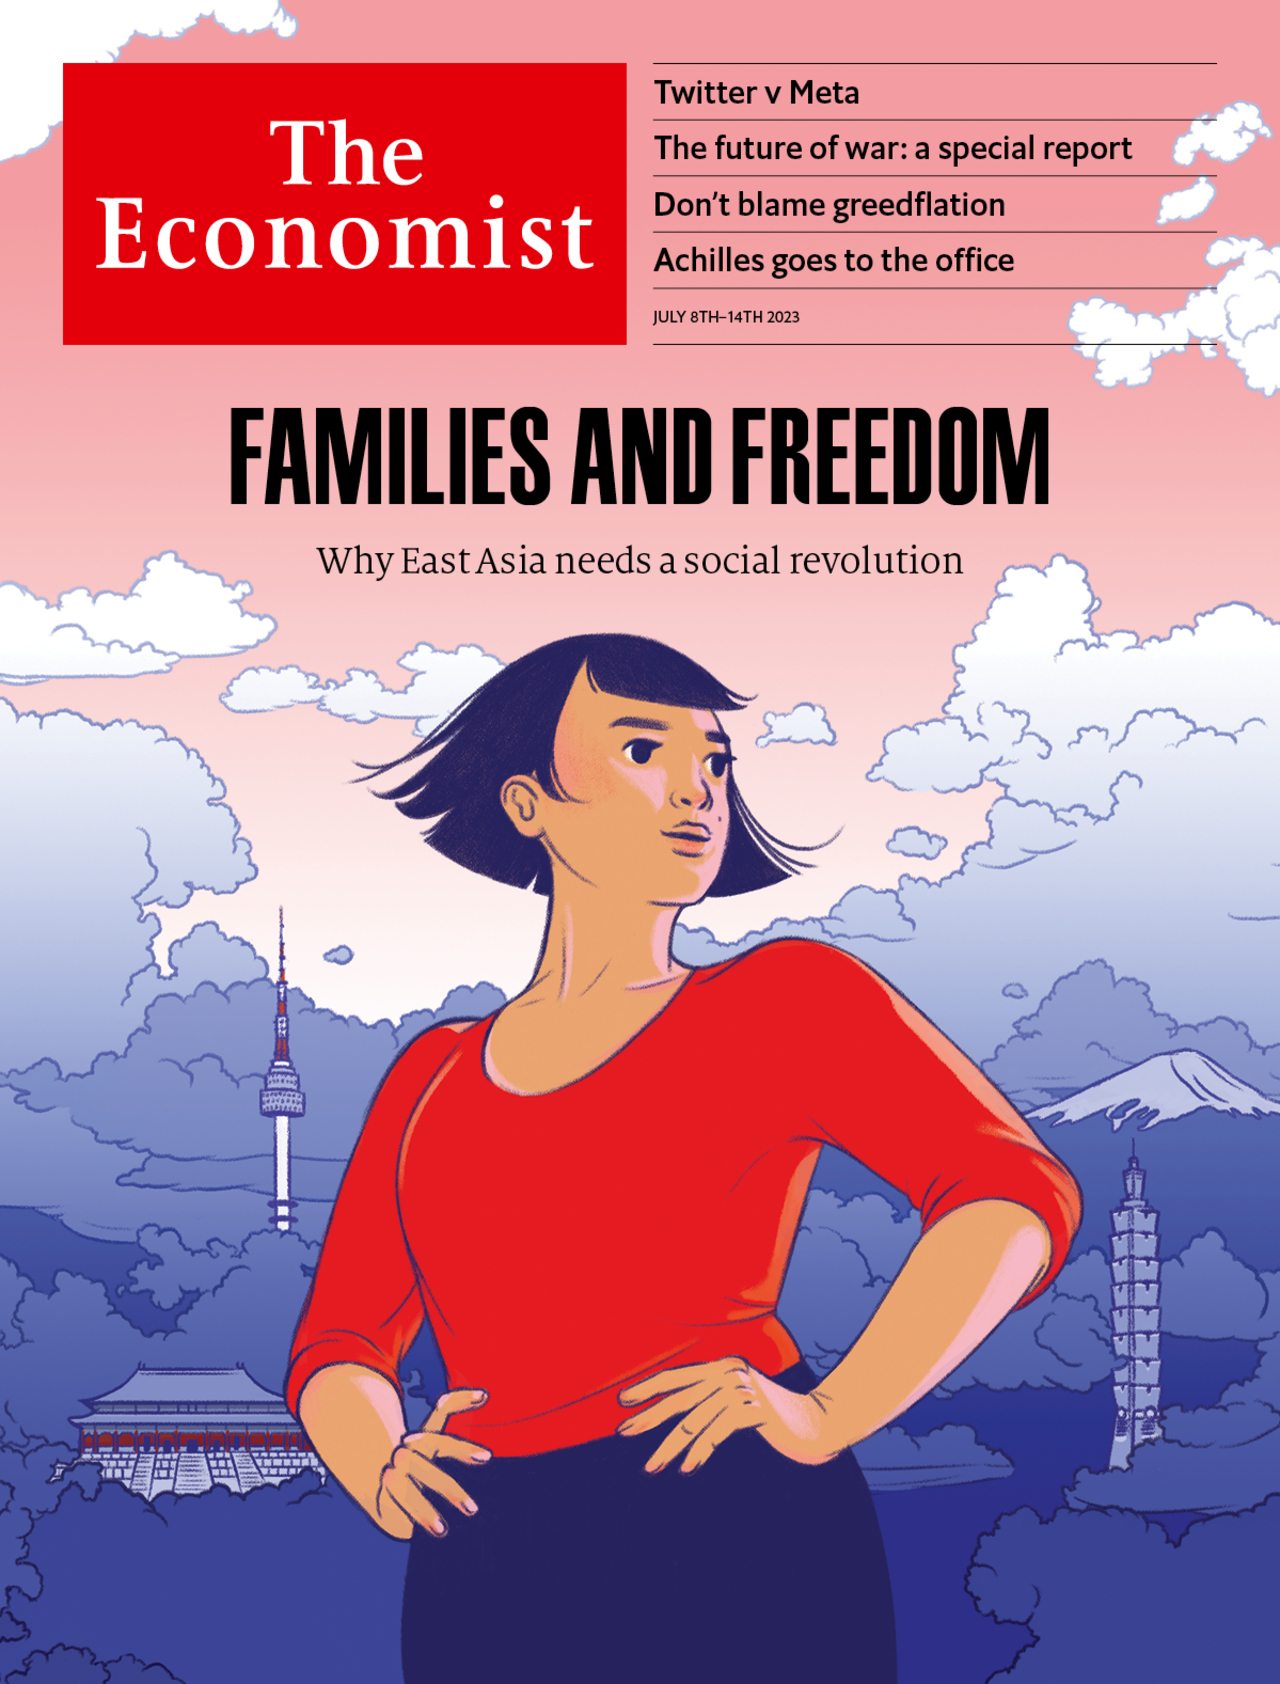 Families and freedom: Why East Asia needs a social revolution